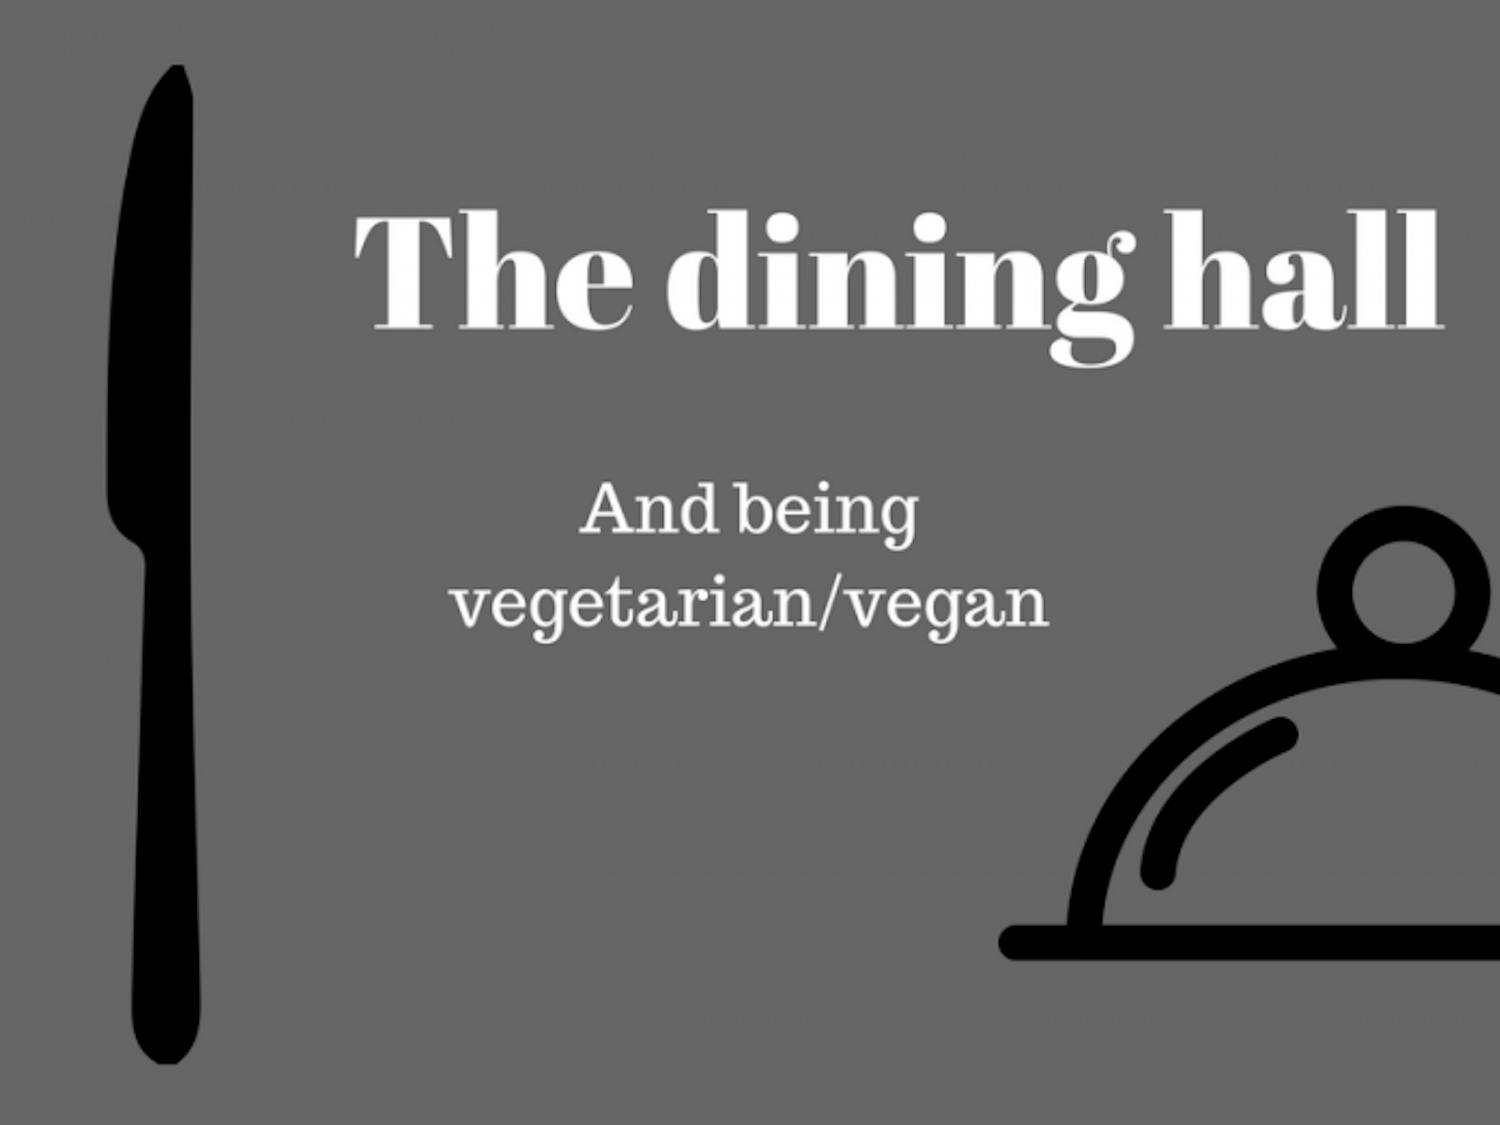 Vegetarian? Living on campus? It's quite the adventure for students who survive off of dining hall food.